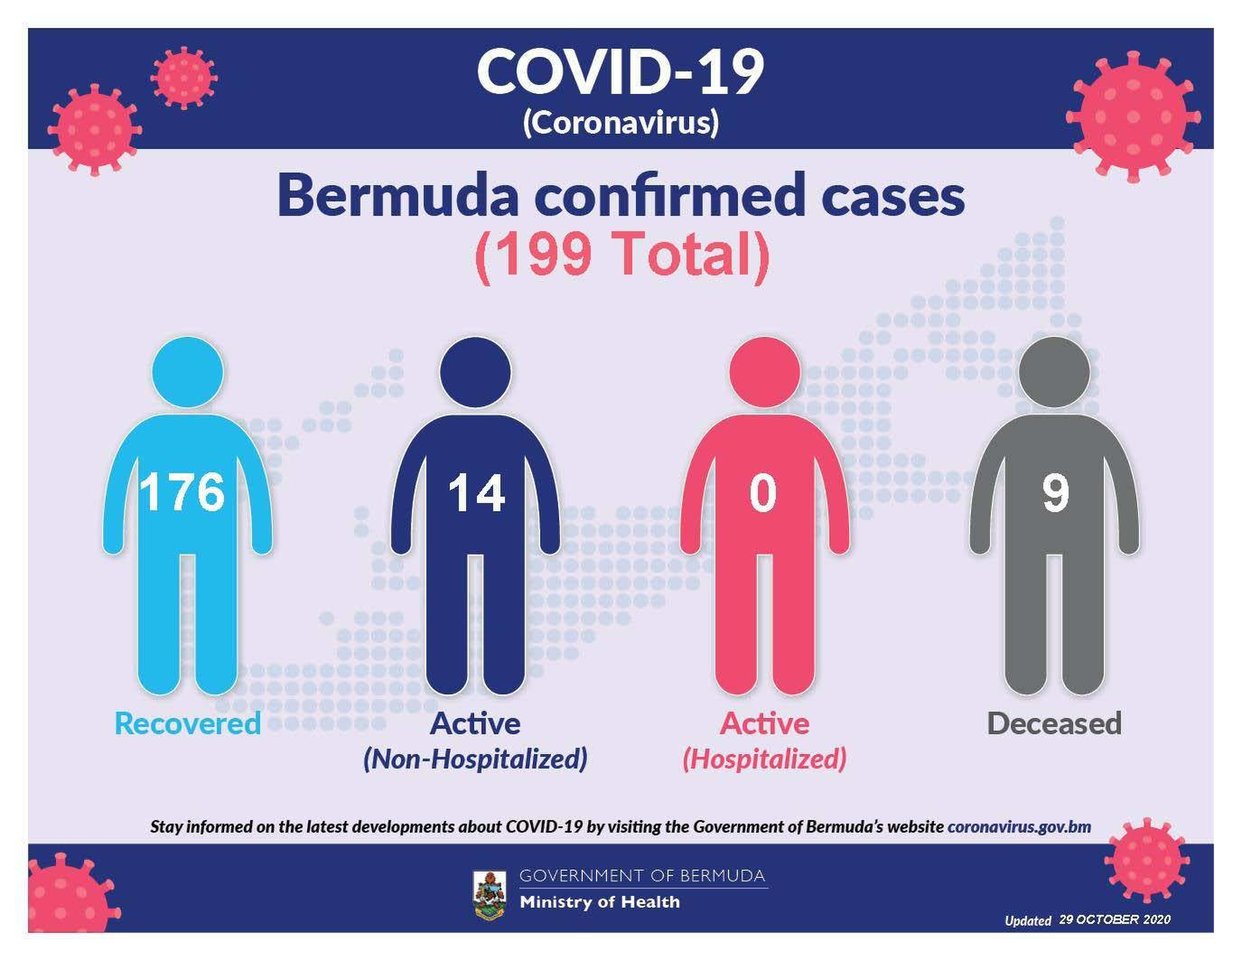 One new COVID-19 case reported in Bermuda, 30 October